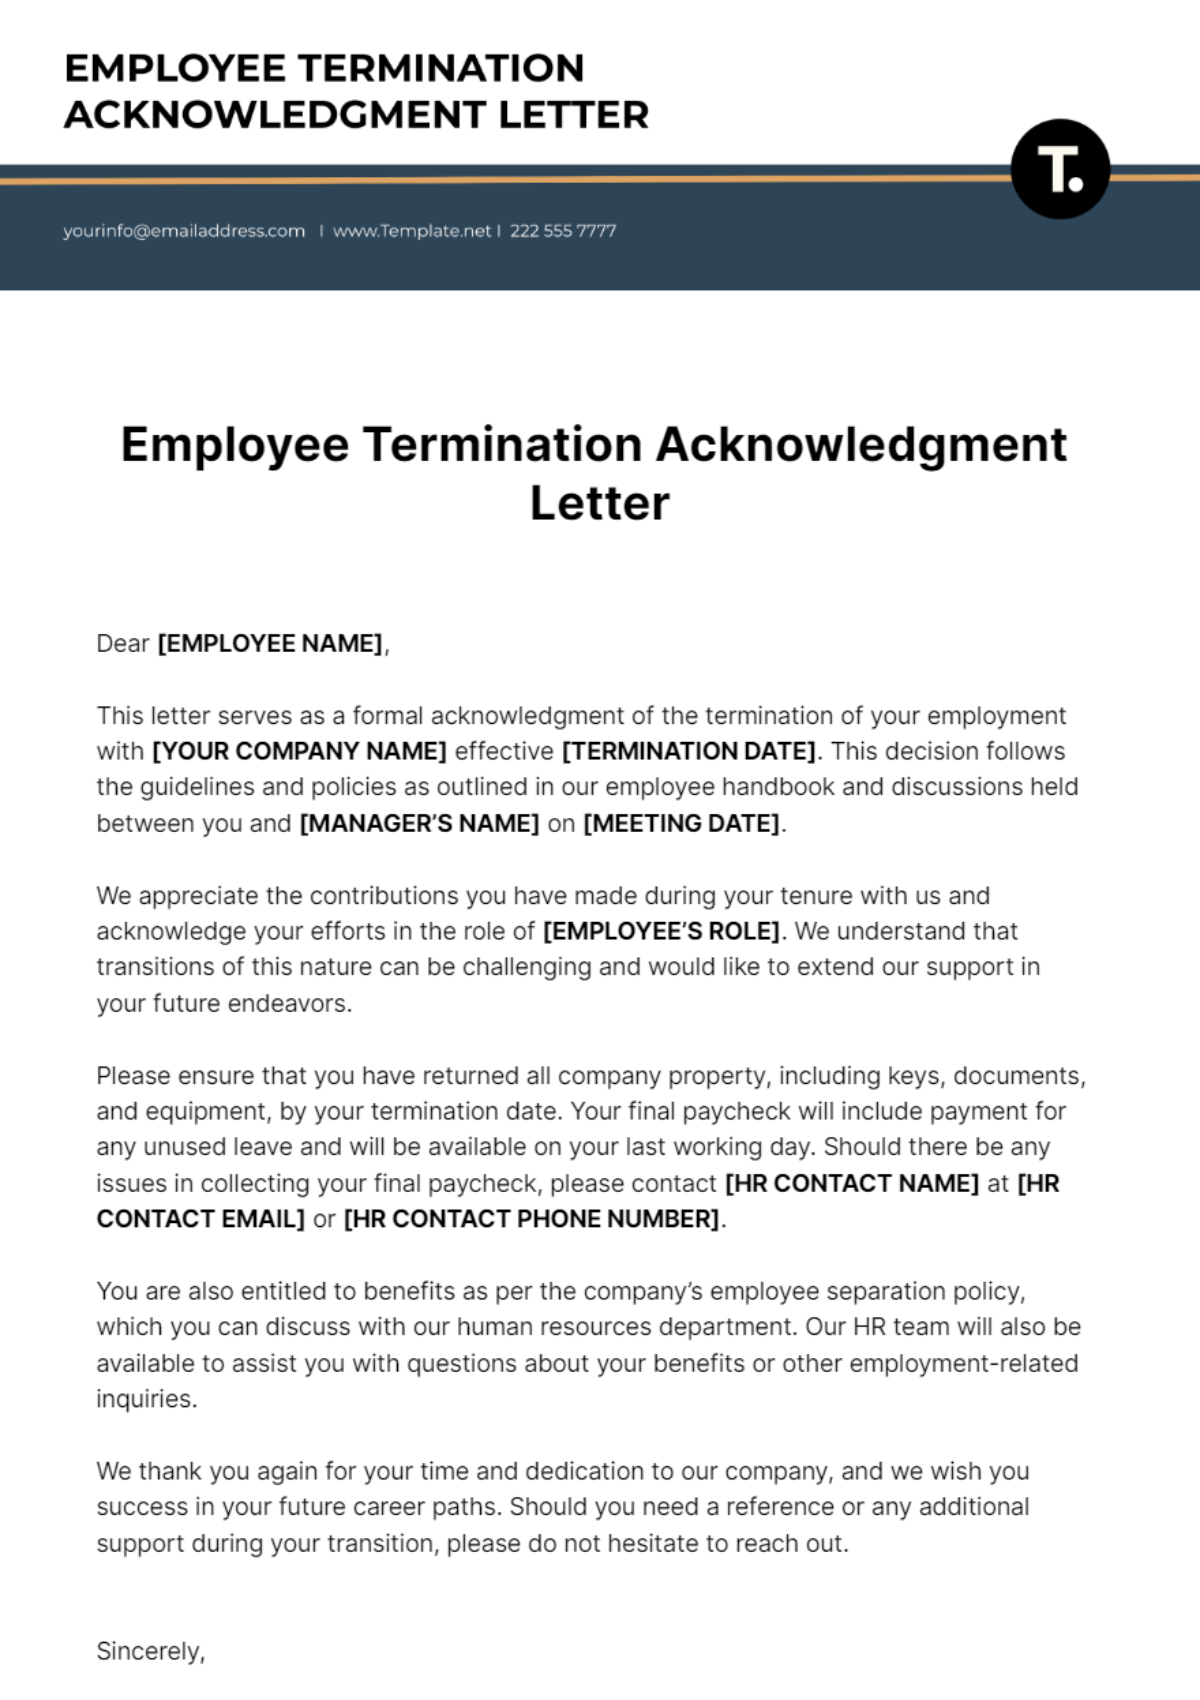 Employee Termination Acknowledgment Letter Template